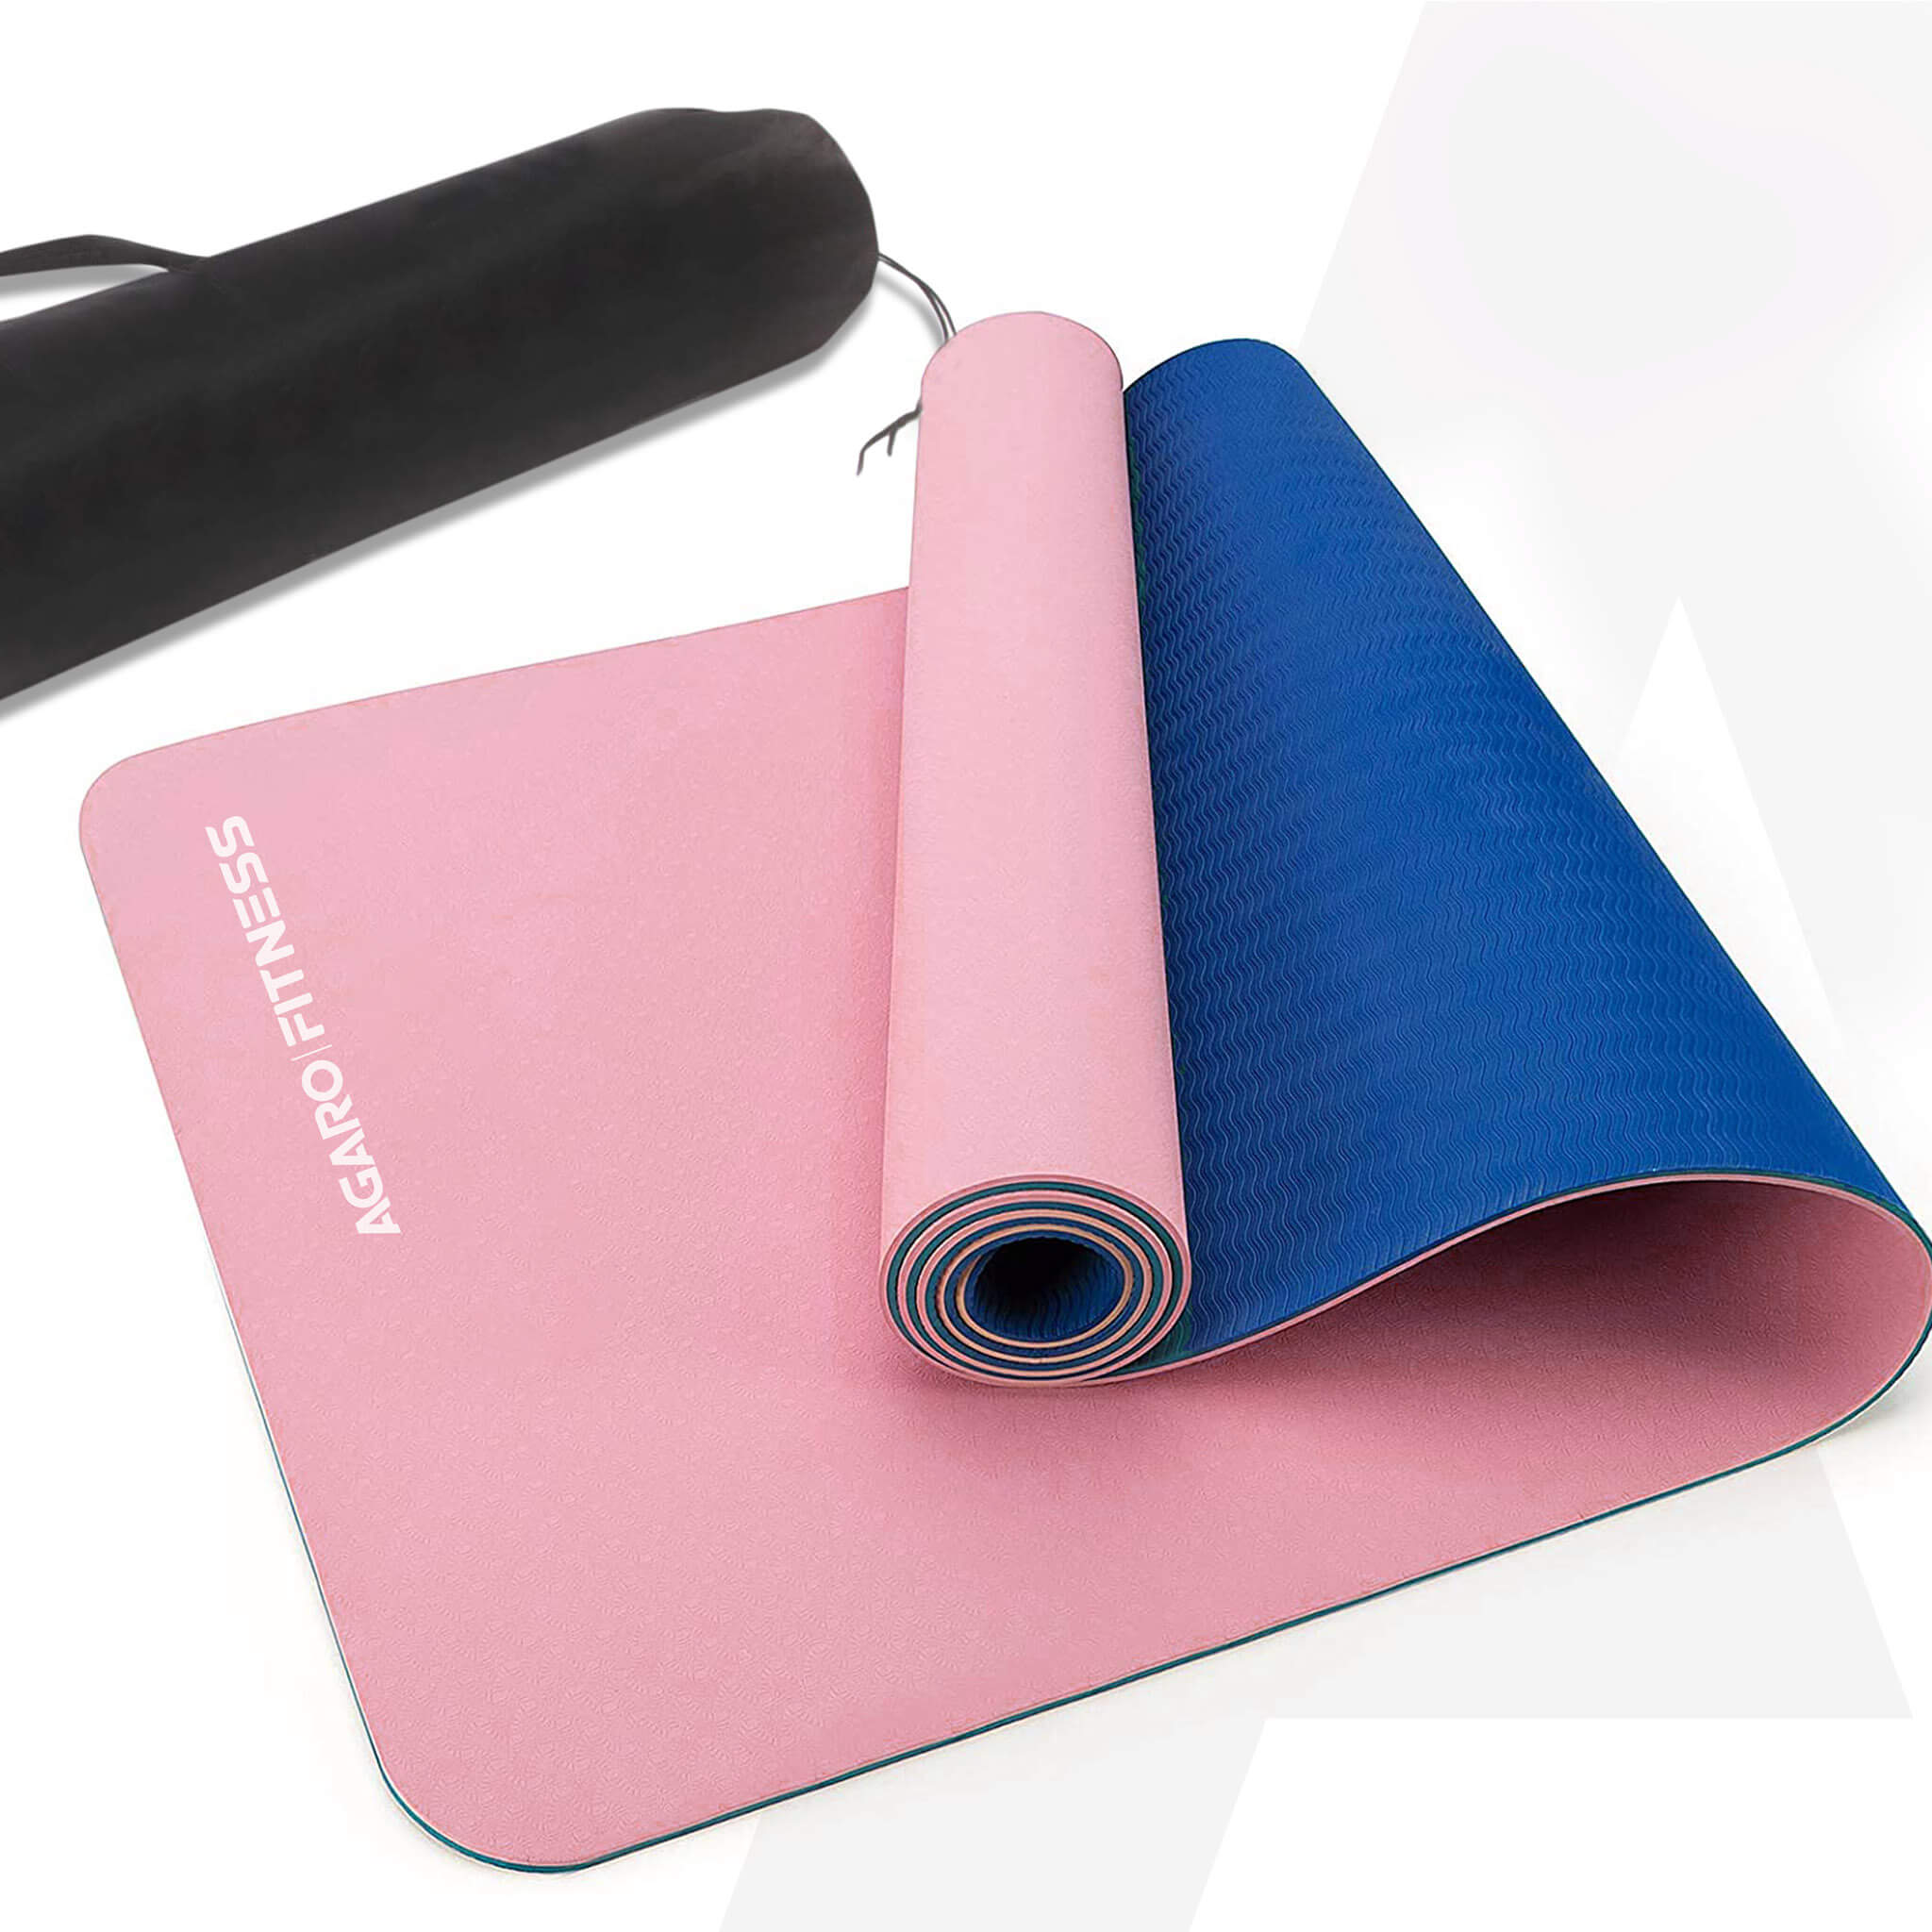 Yoga mat PU pastel pink with guide lines (183 cm x 68 cm x 0.4 cm) - Pure  Yoga Online